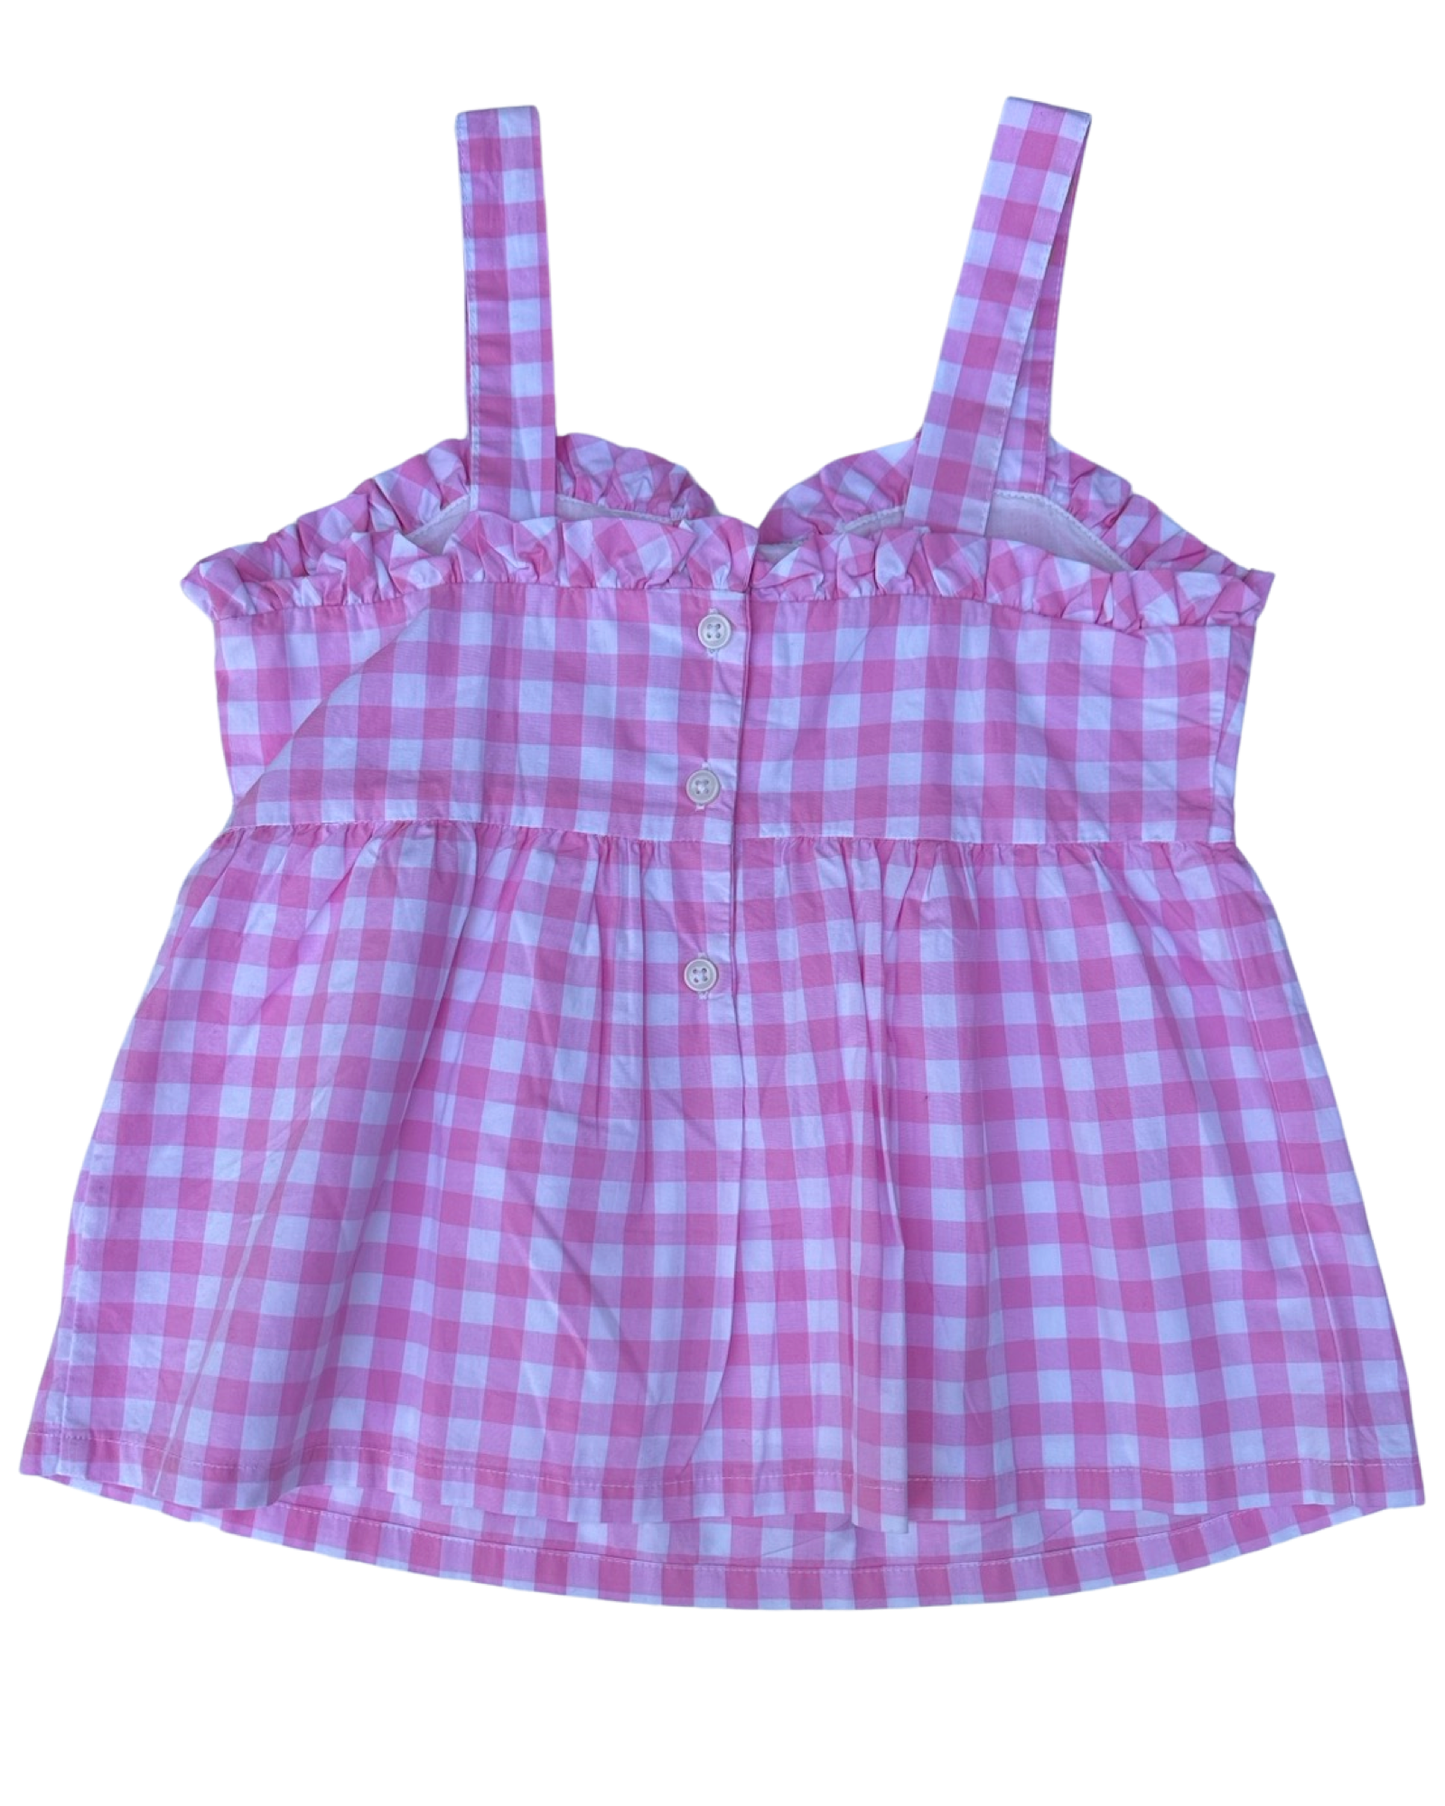 Janie & Jack pink gingham top (size 6yrs)